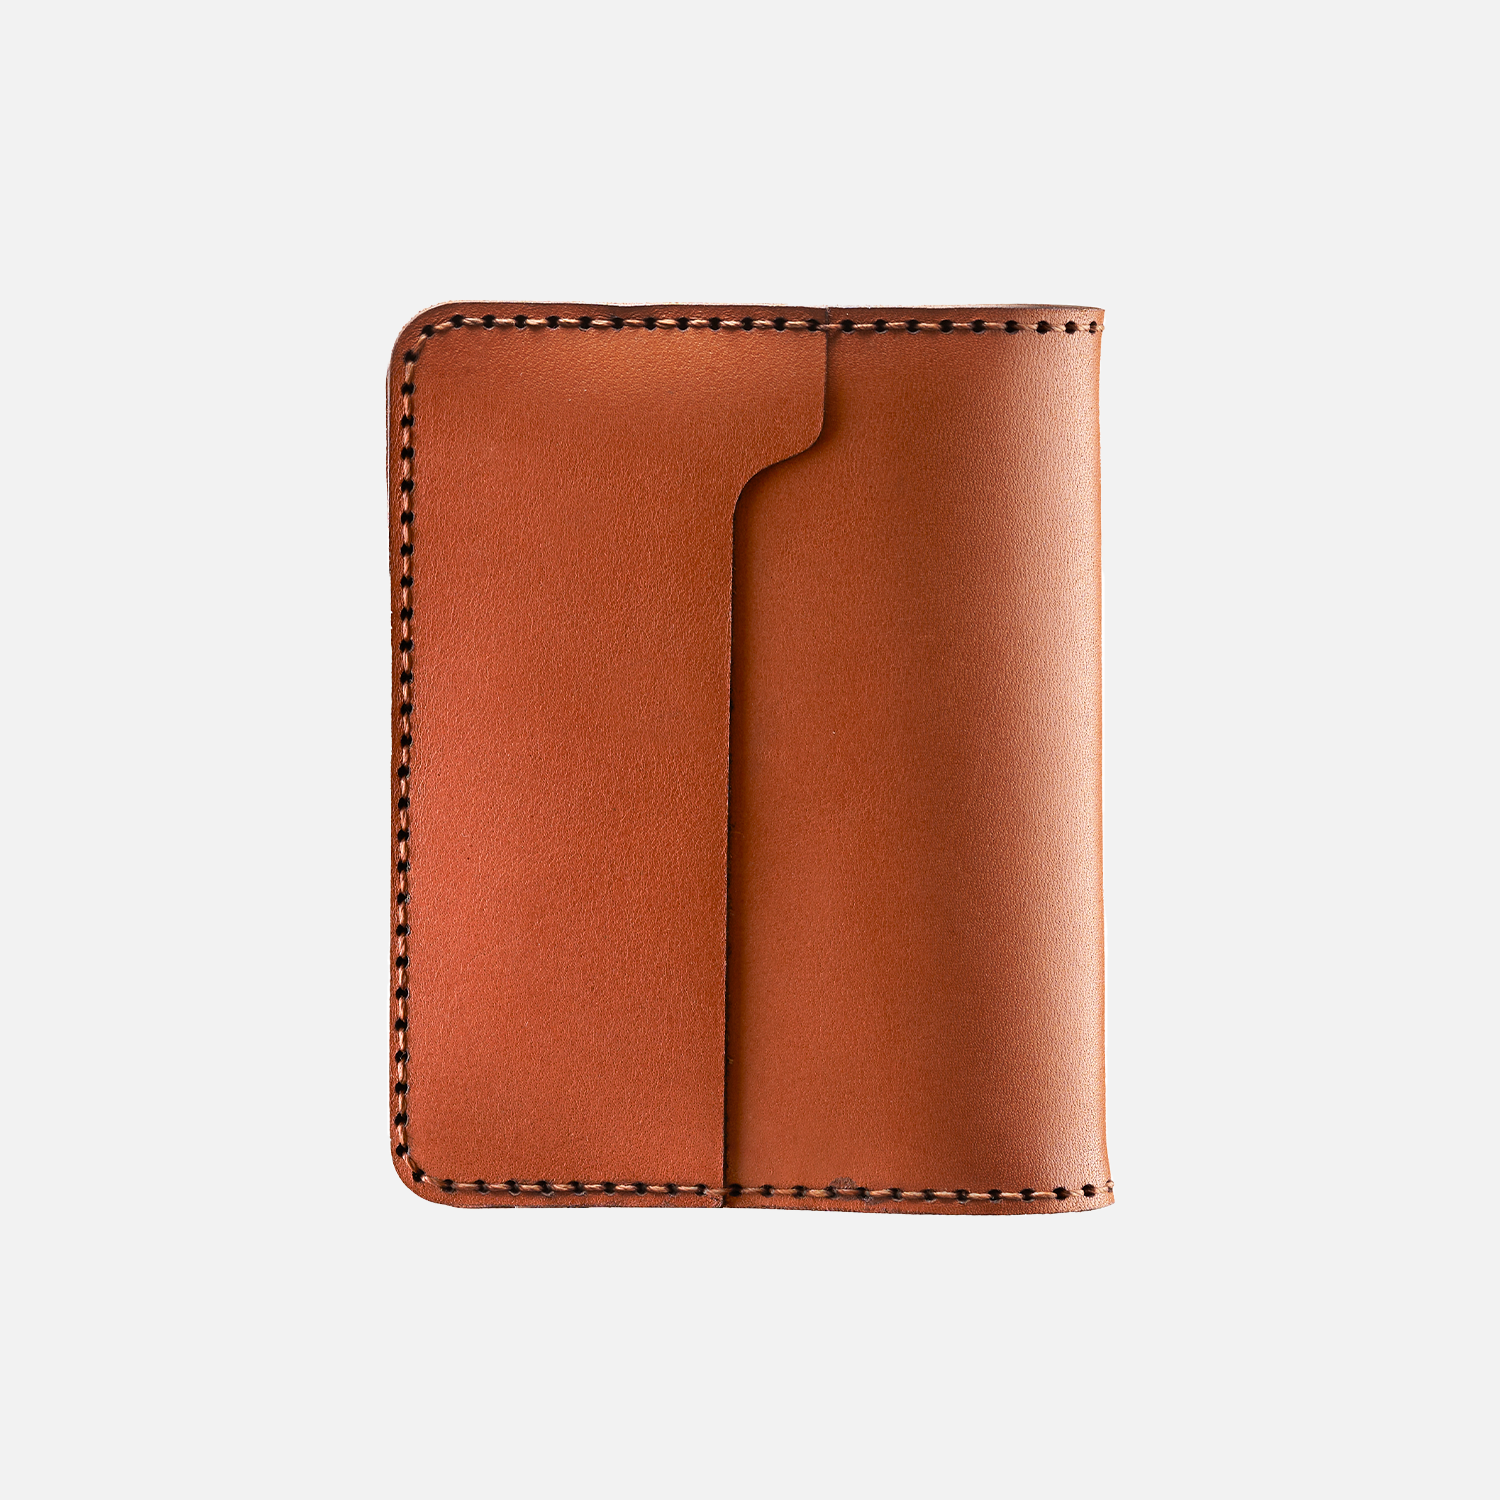 Brown leather bifold wallet isolated on white background.